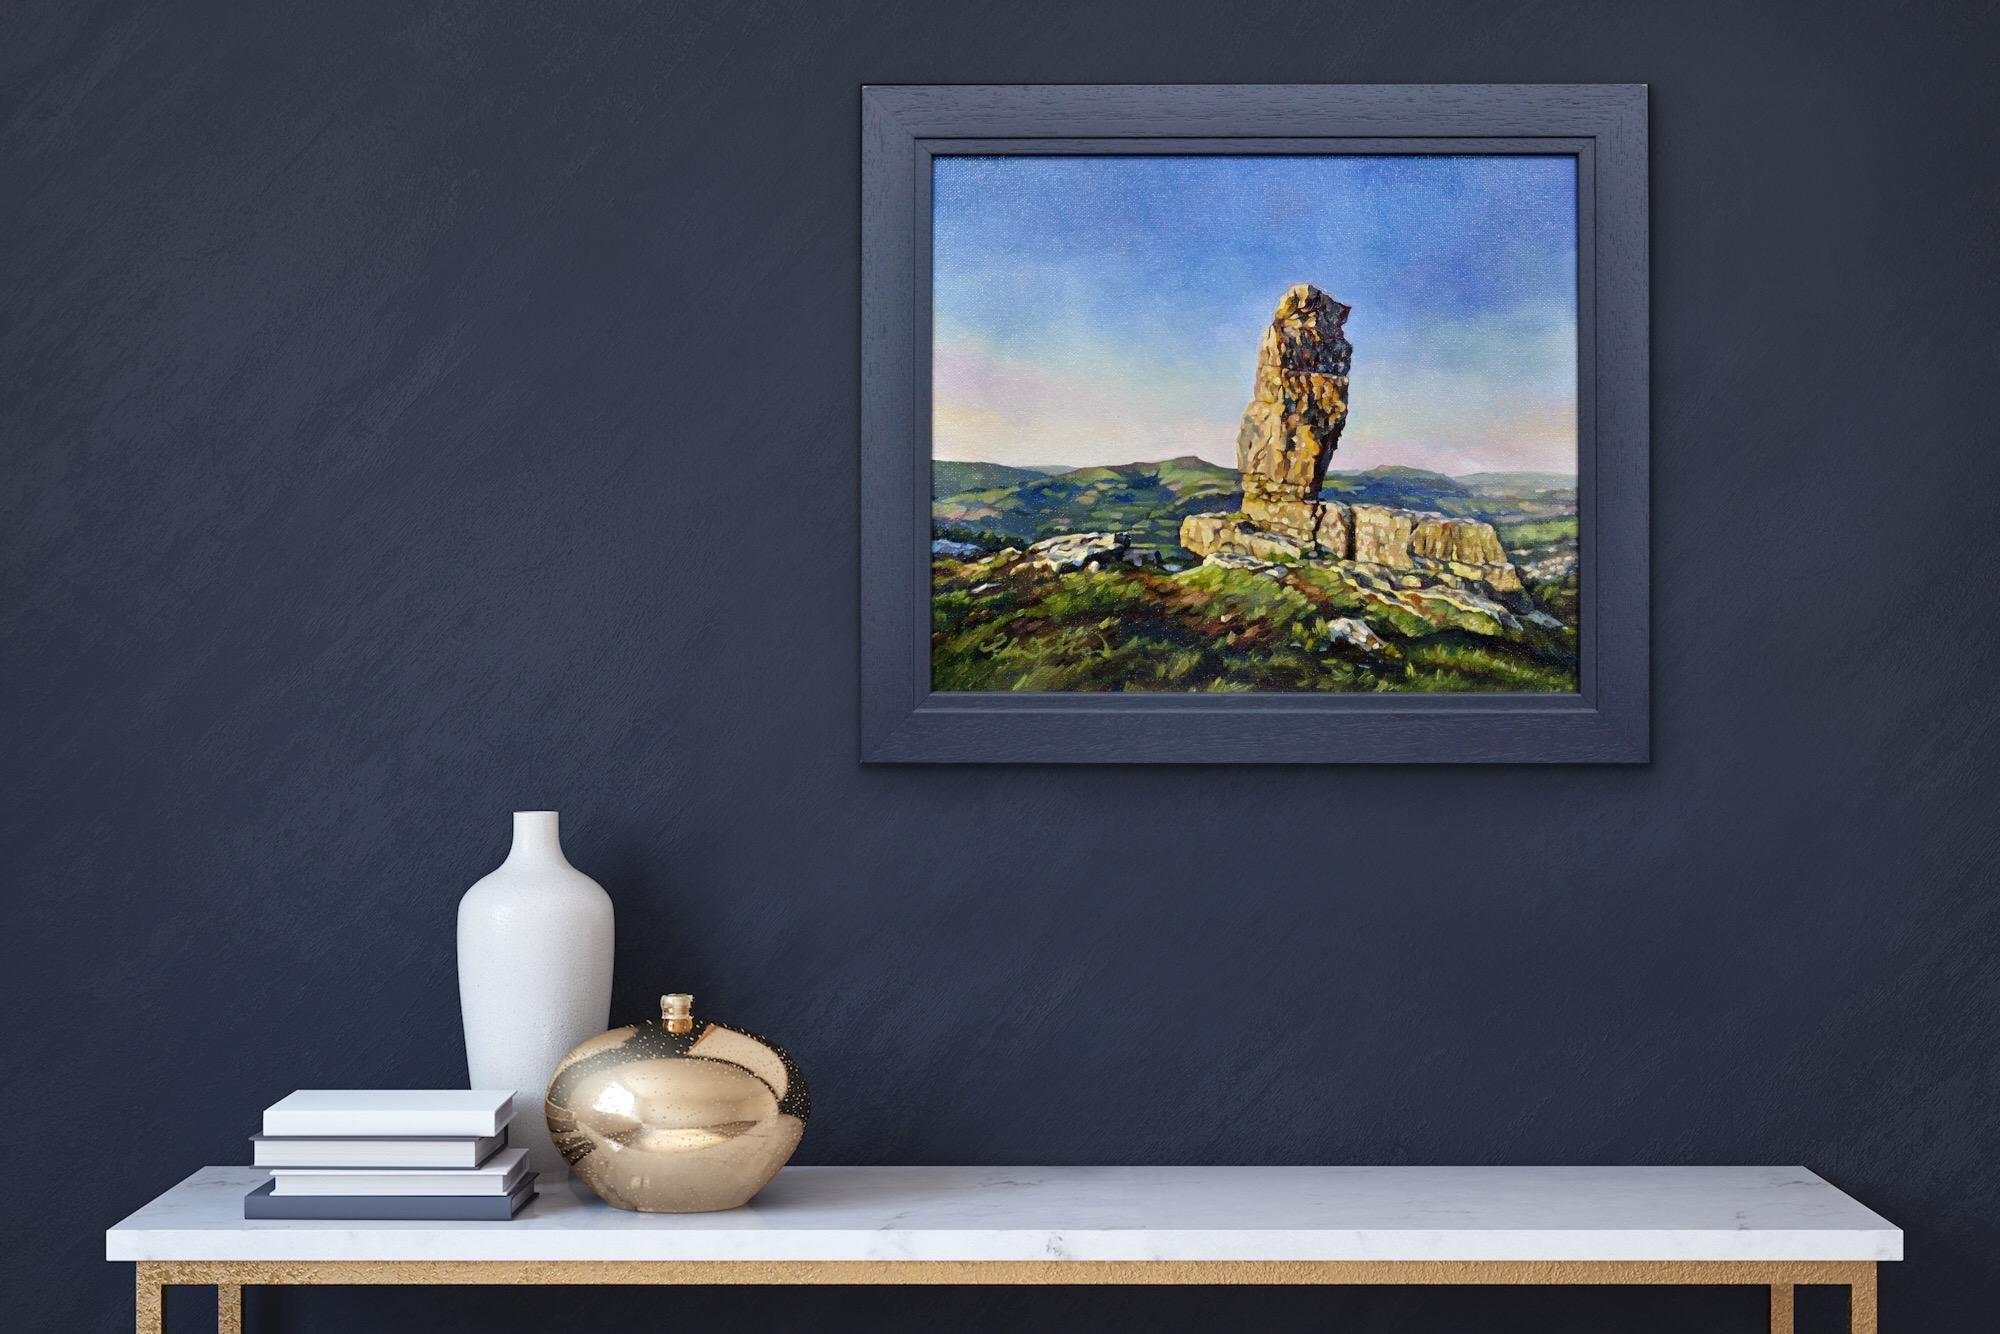 Y Bugail Unig (The Lonely Shepherd), Llangattock, Brecon Beacons. Welsh Folklore For Sale 6